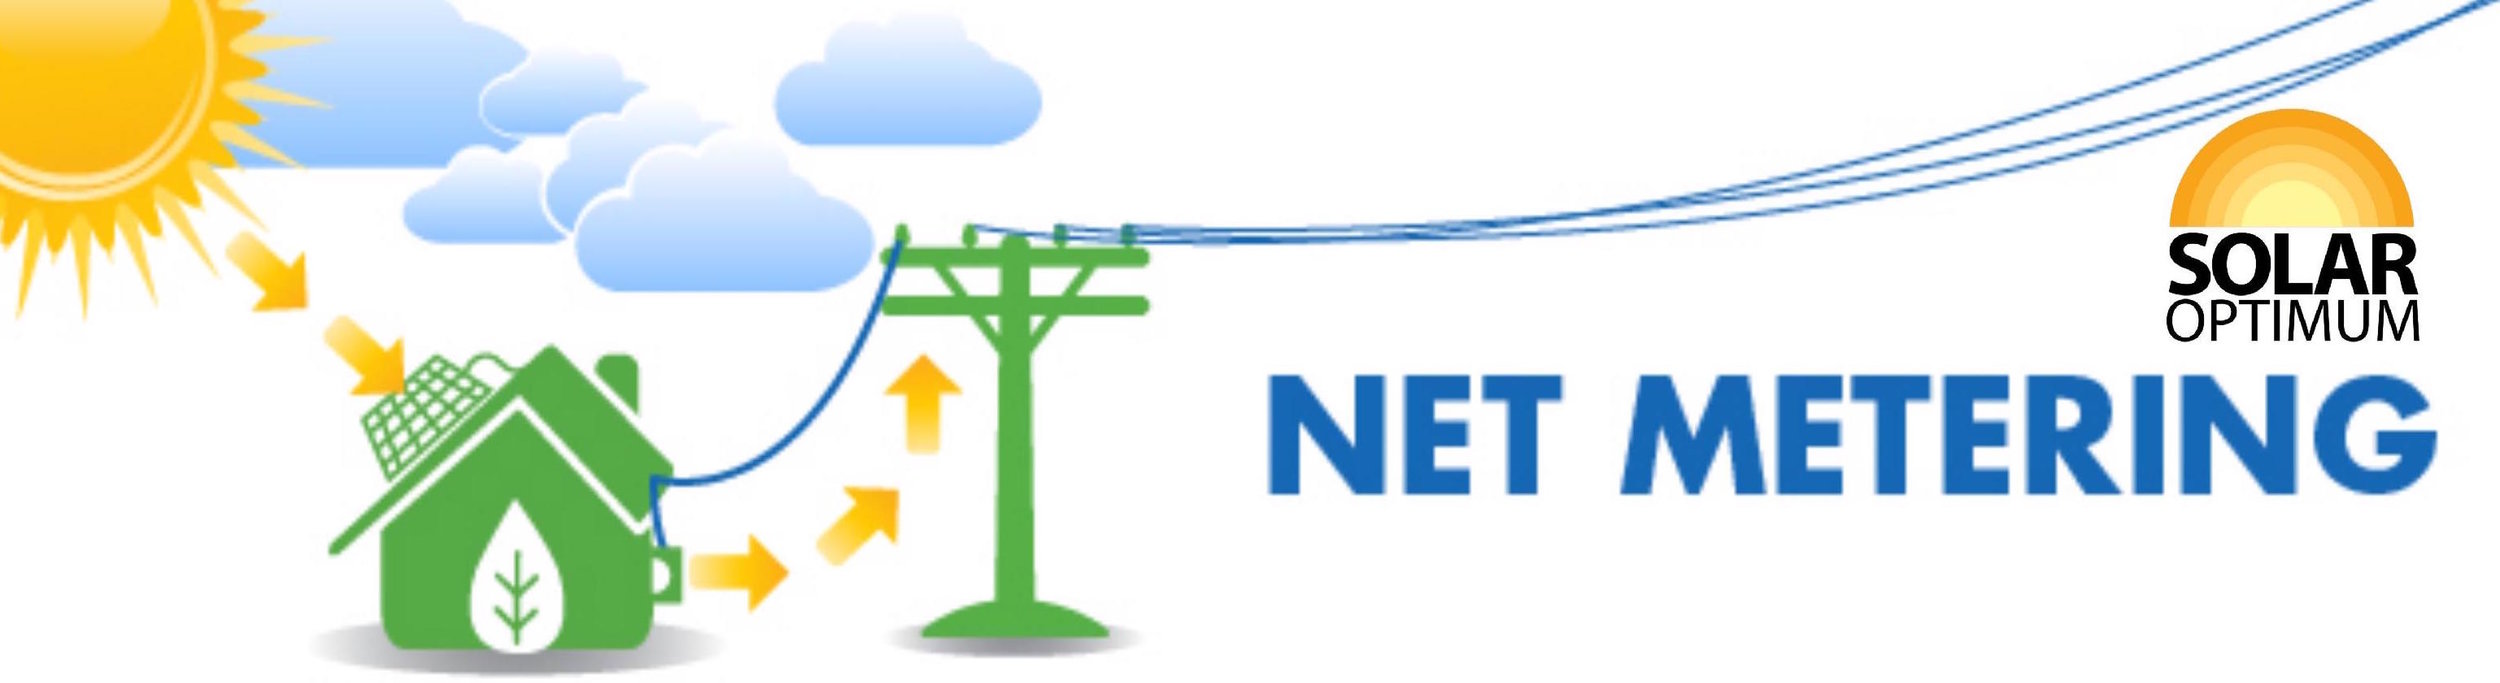 Net Energy Metering 1.0 is a Money-Saving Opportunity You Just Can’t Afford to Miss.